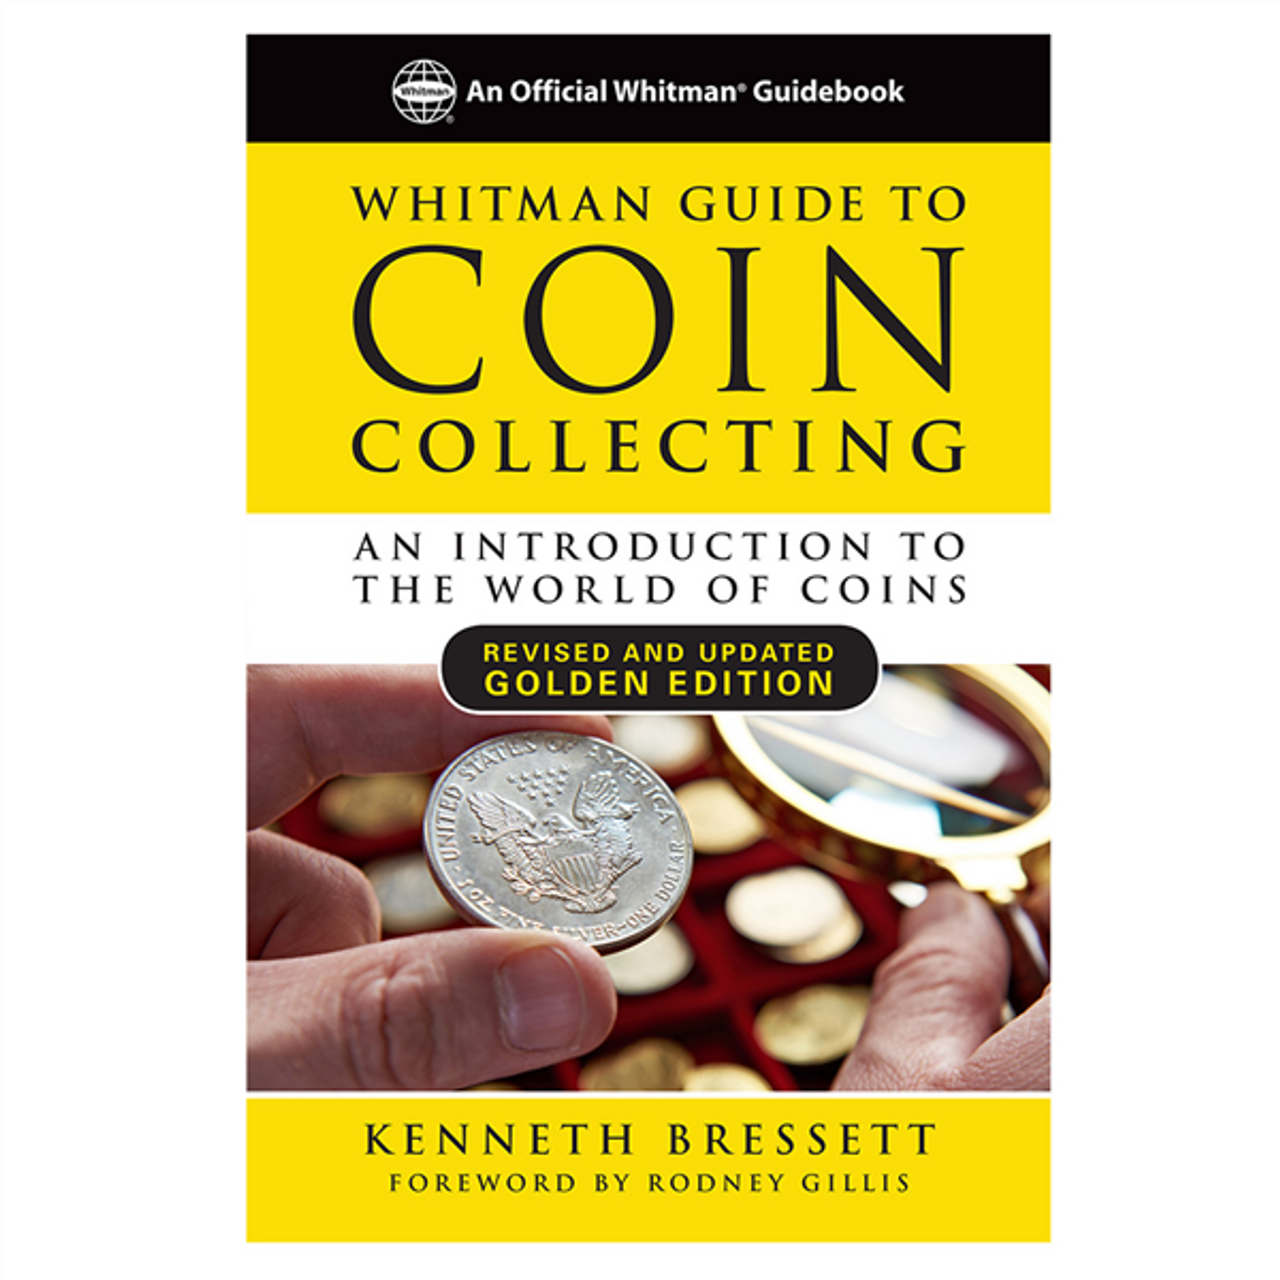 The Basics Of Coin Collecting For Beginners: Part 2